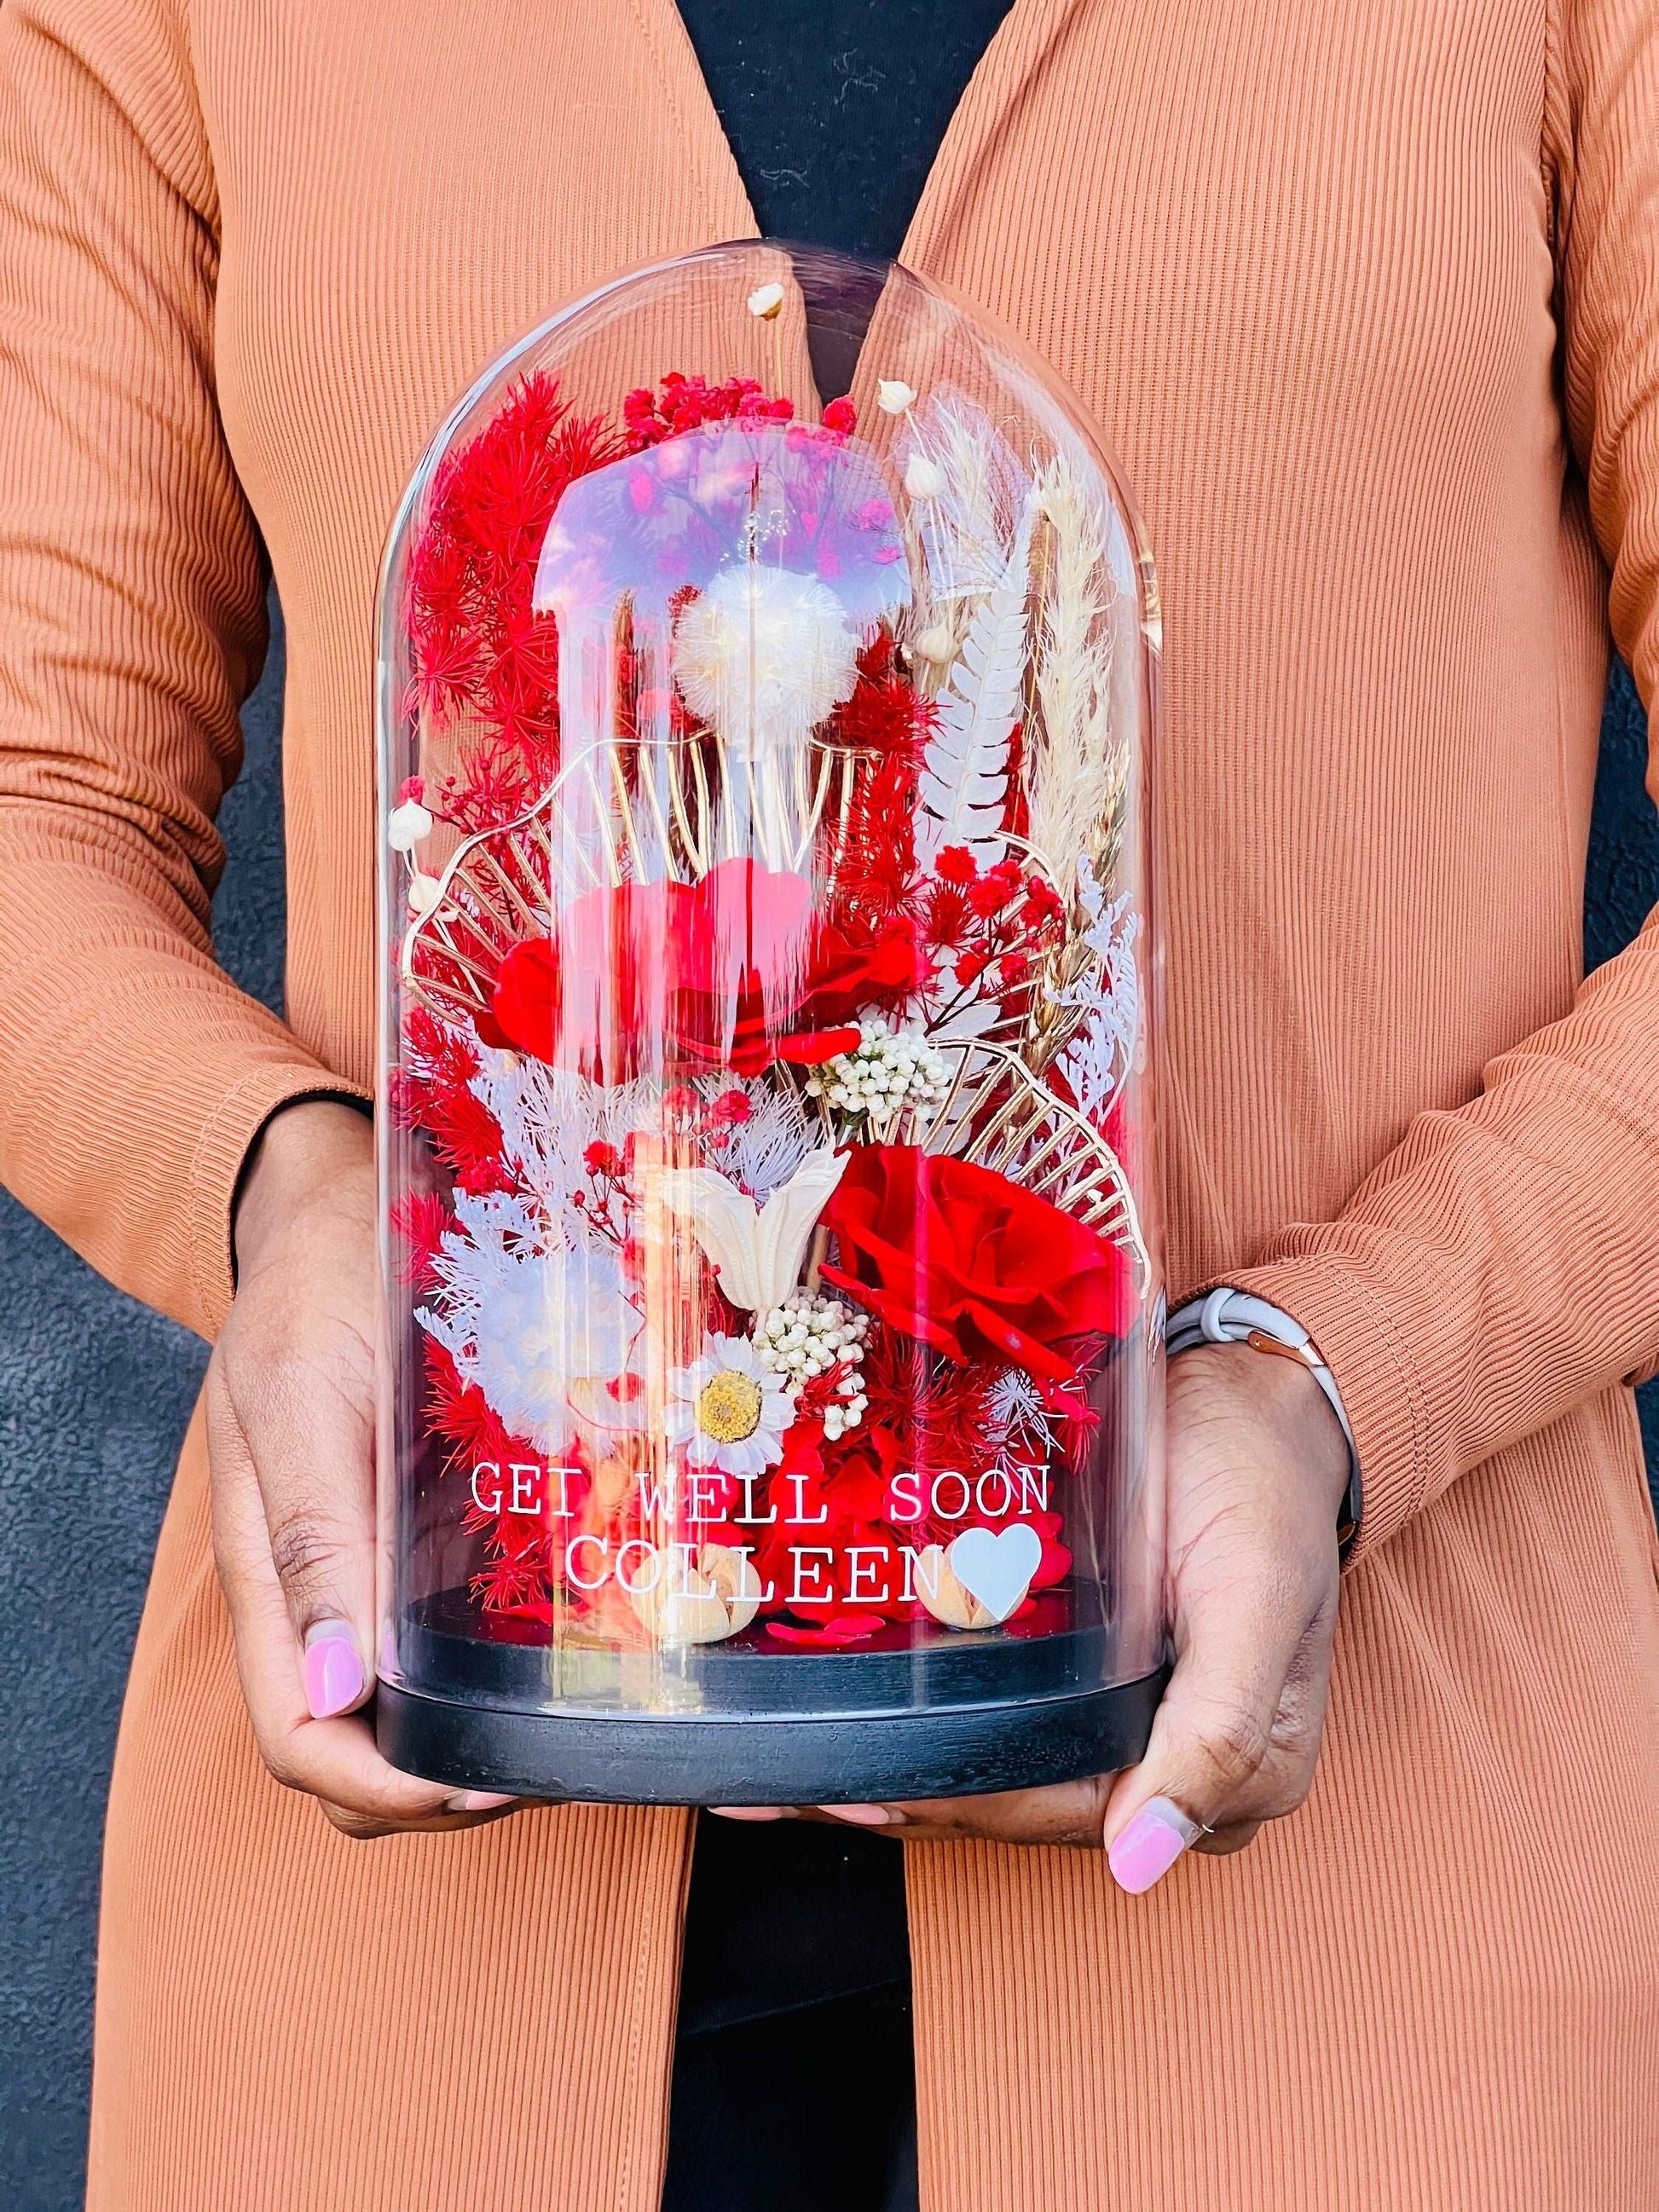 Capture the beauty of a moment in time with this red glass dome! Handcrafted with a stunning red glass dome and adorned with dried flowers, it will bring inspiration and delight to any home. Perfect for displaying your special memories.